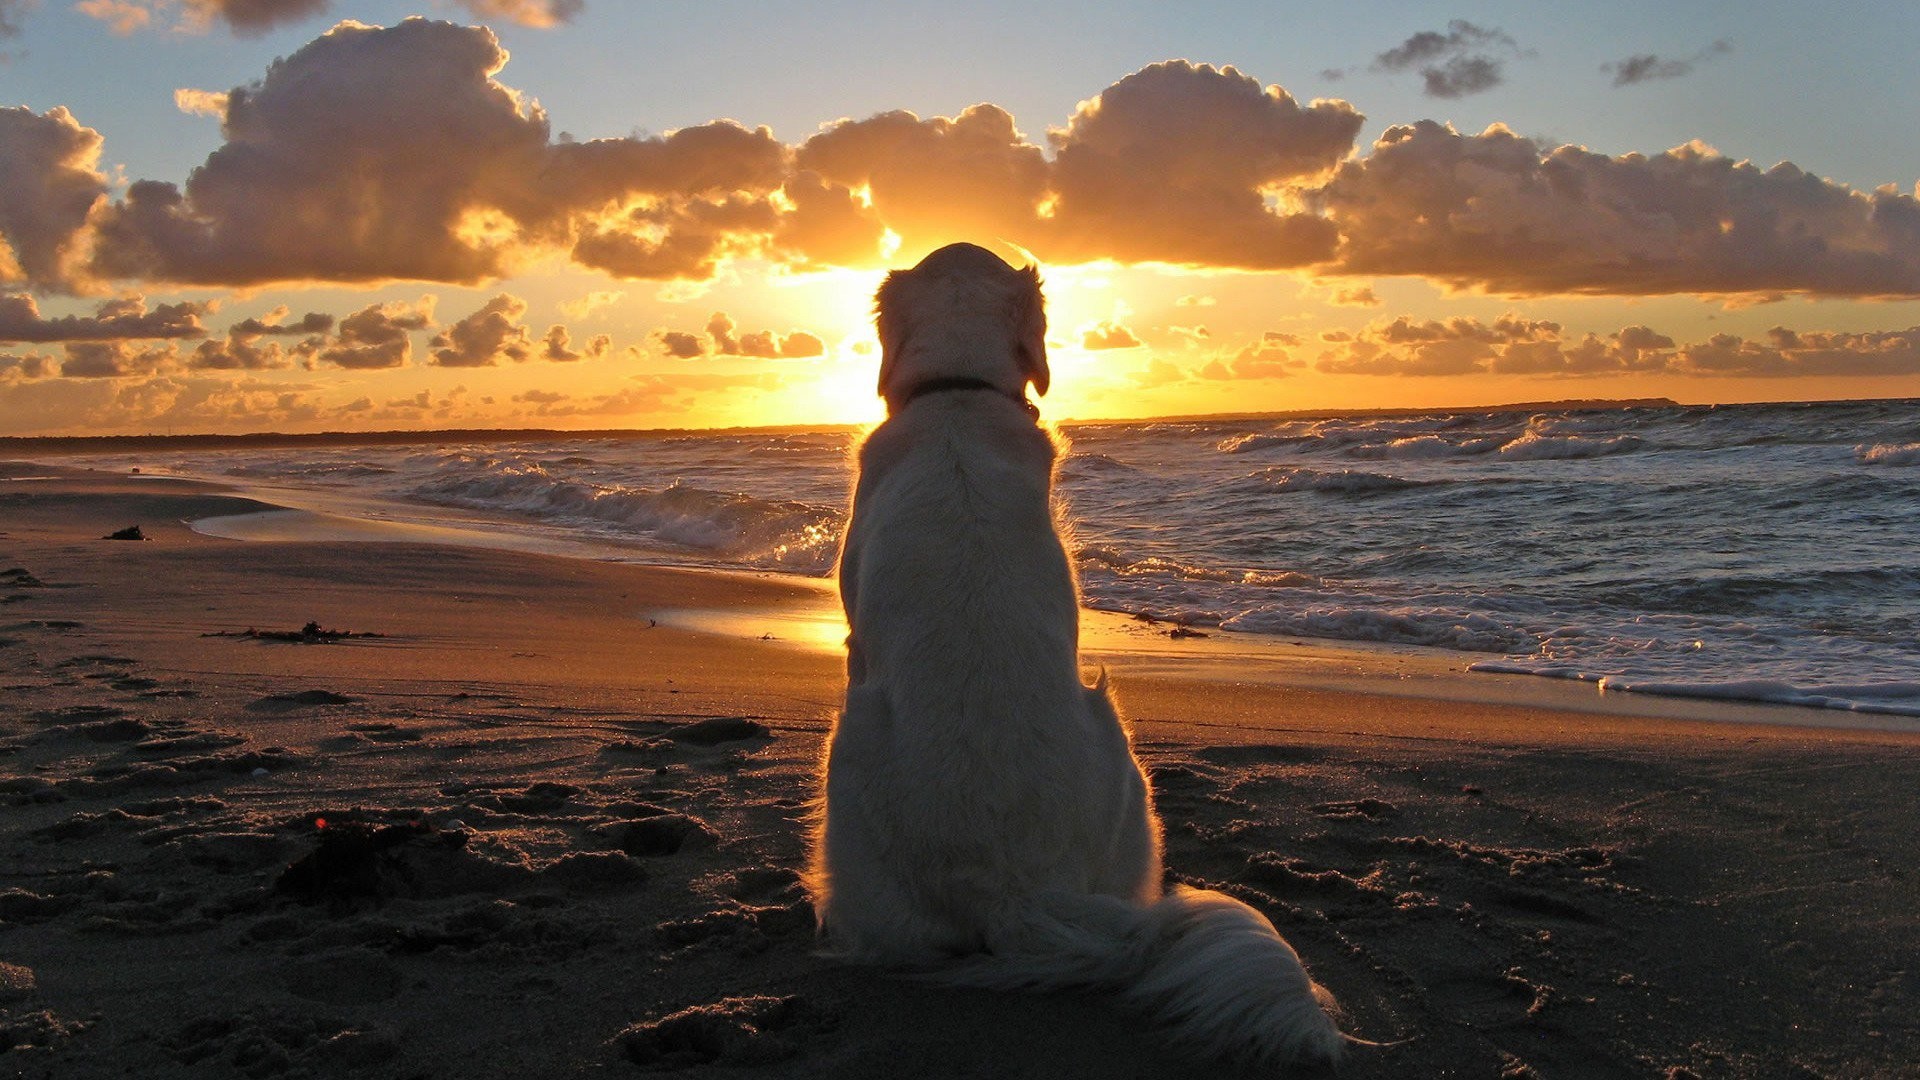 1920x1080 Labrador full hd wallpaper dog on beach at sunset amazing colors.